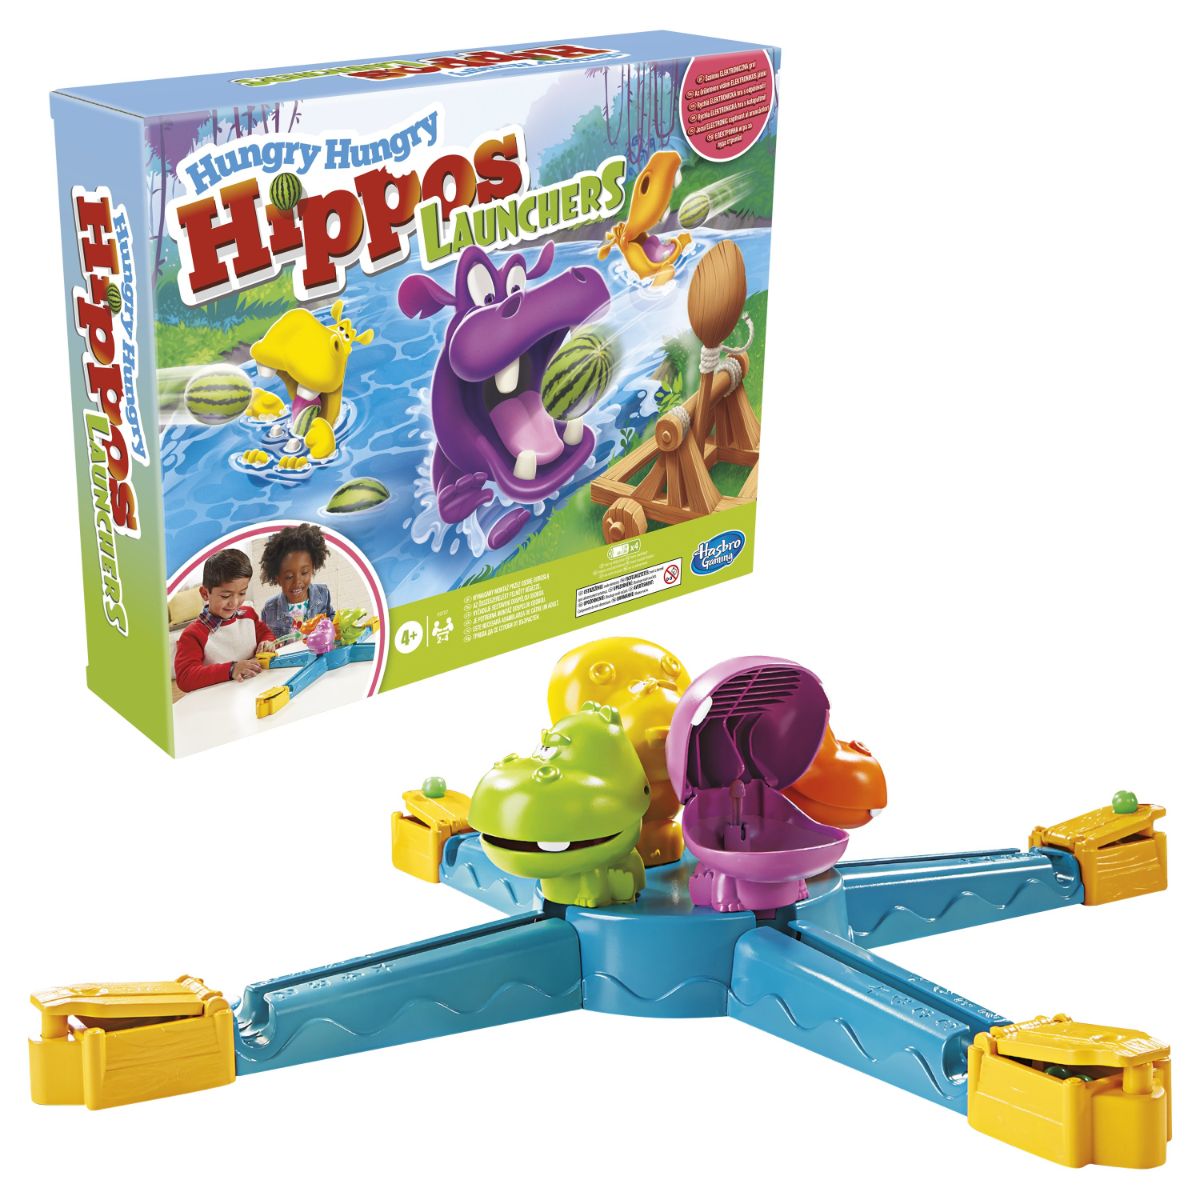 Hungry hippos launchers